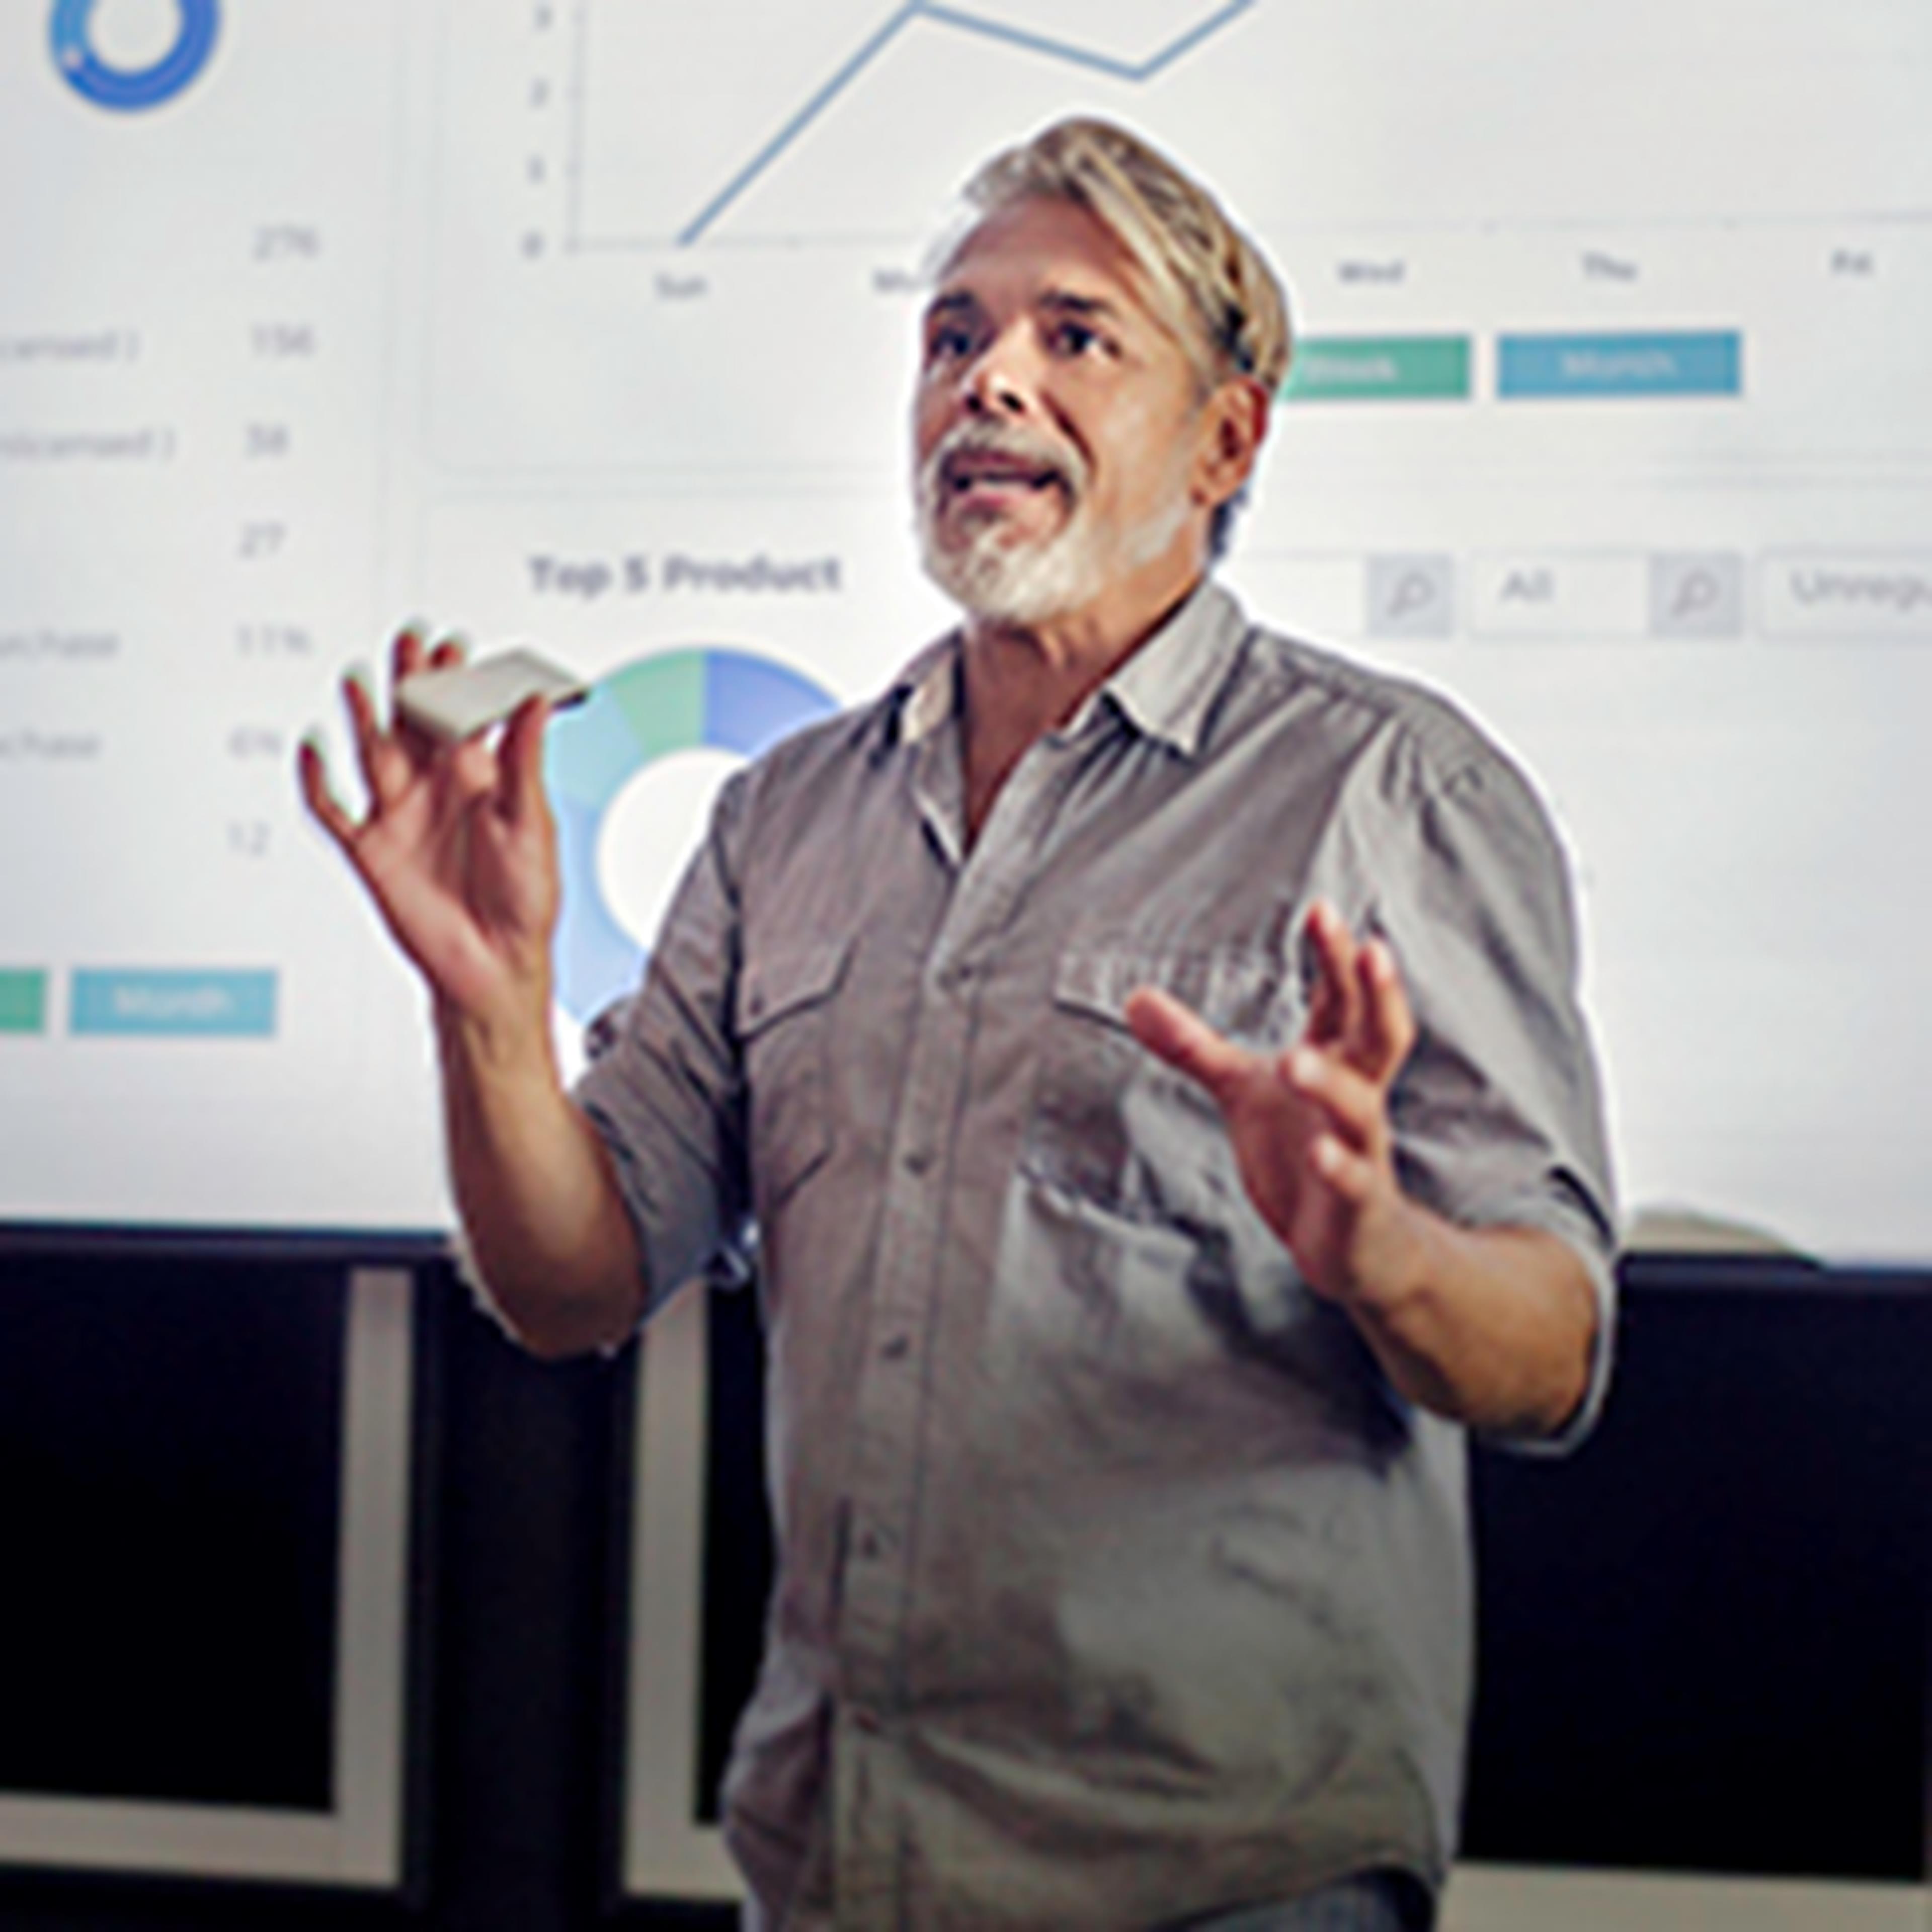 Person with white hair and beard in front of a board with graphs explaining something